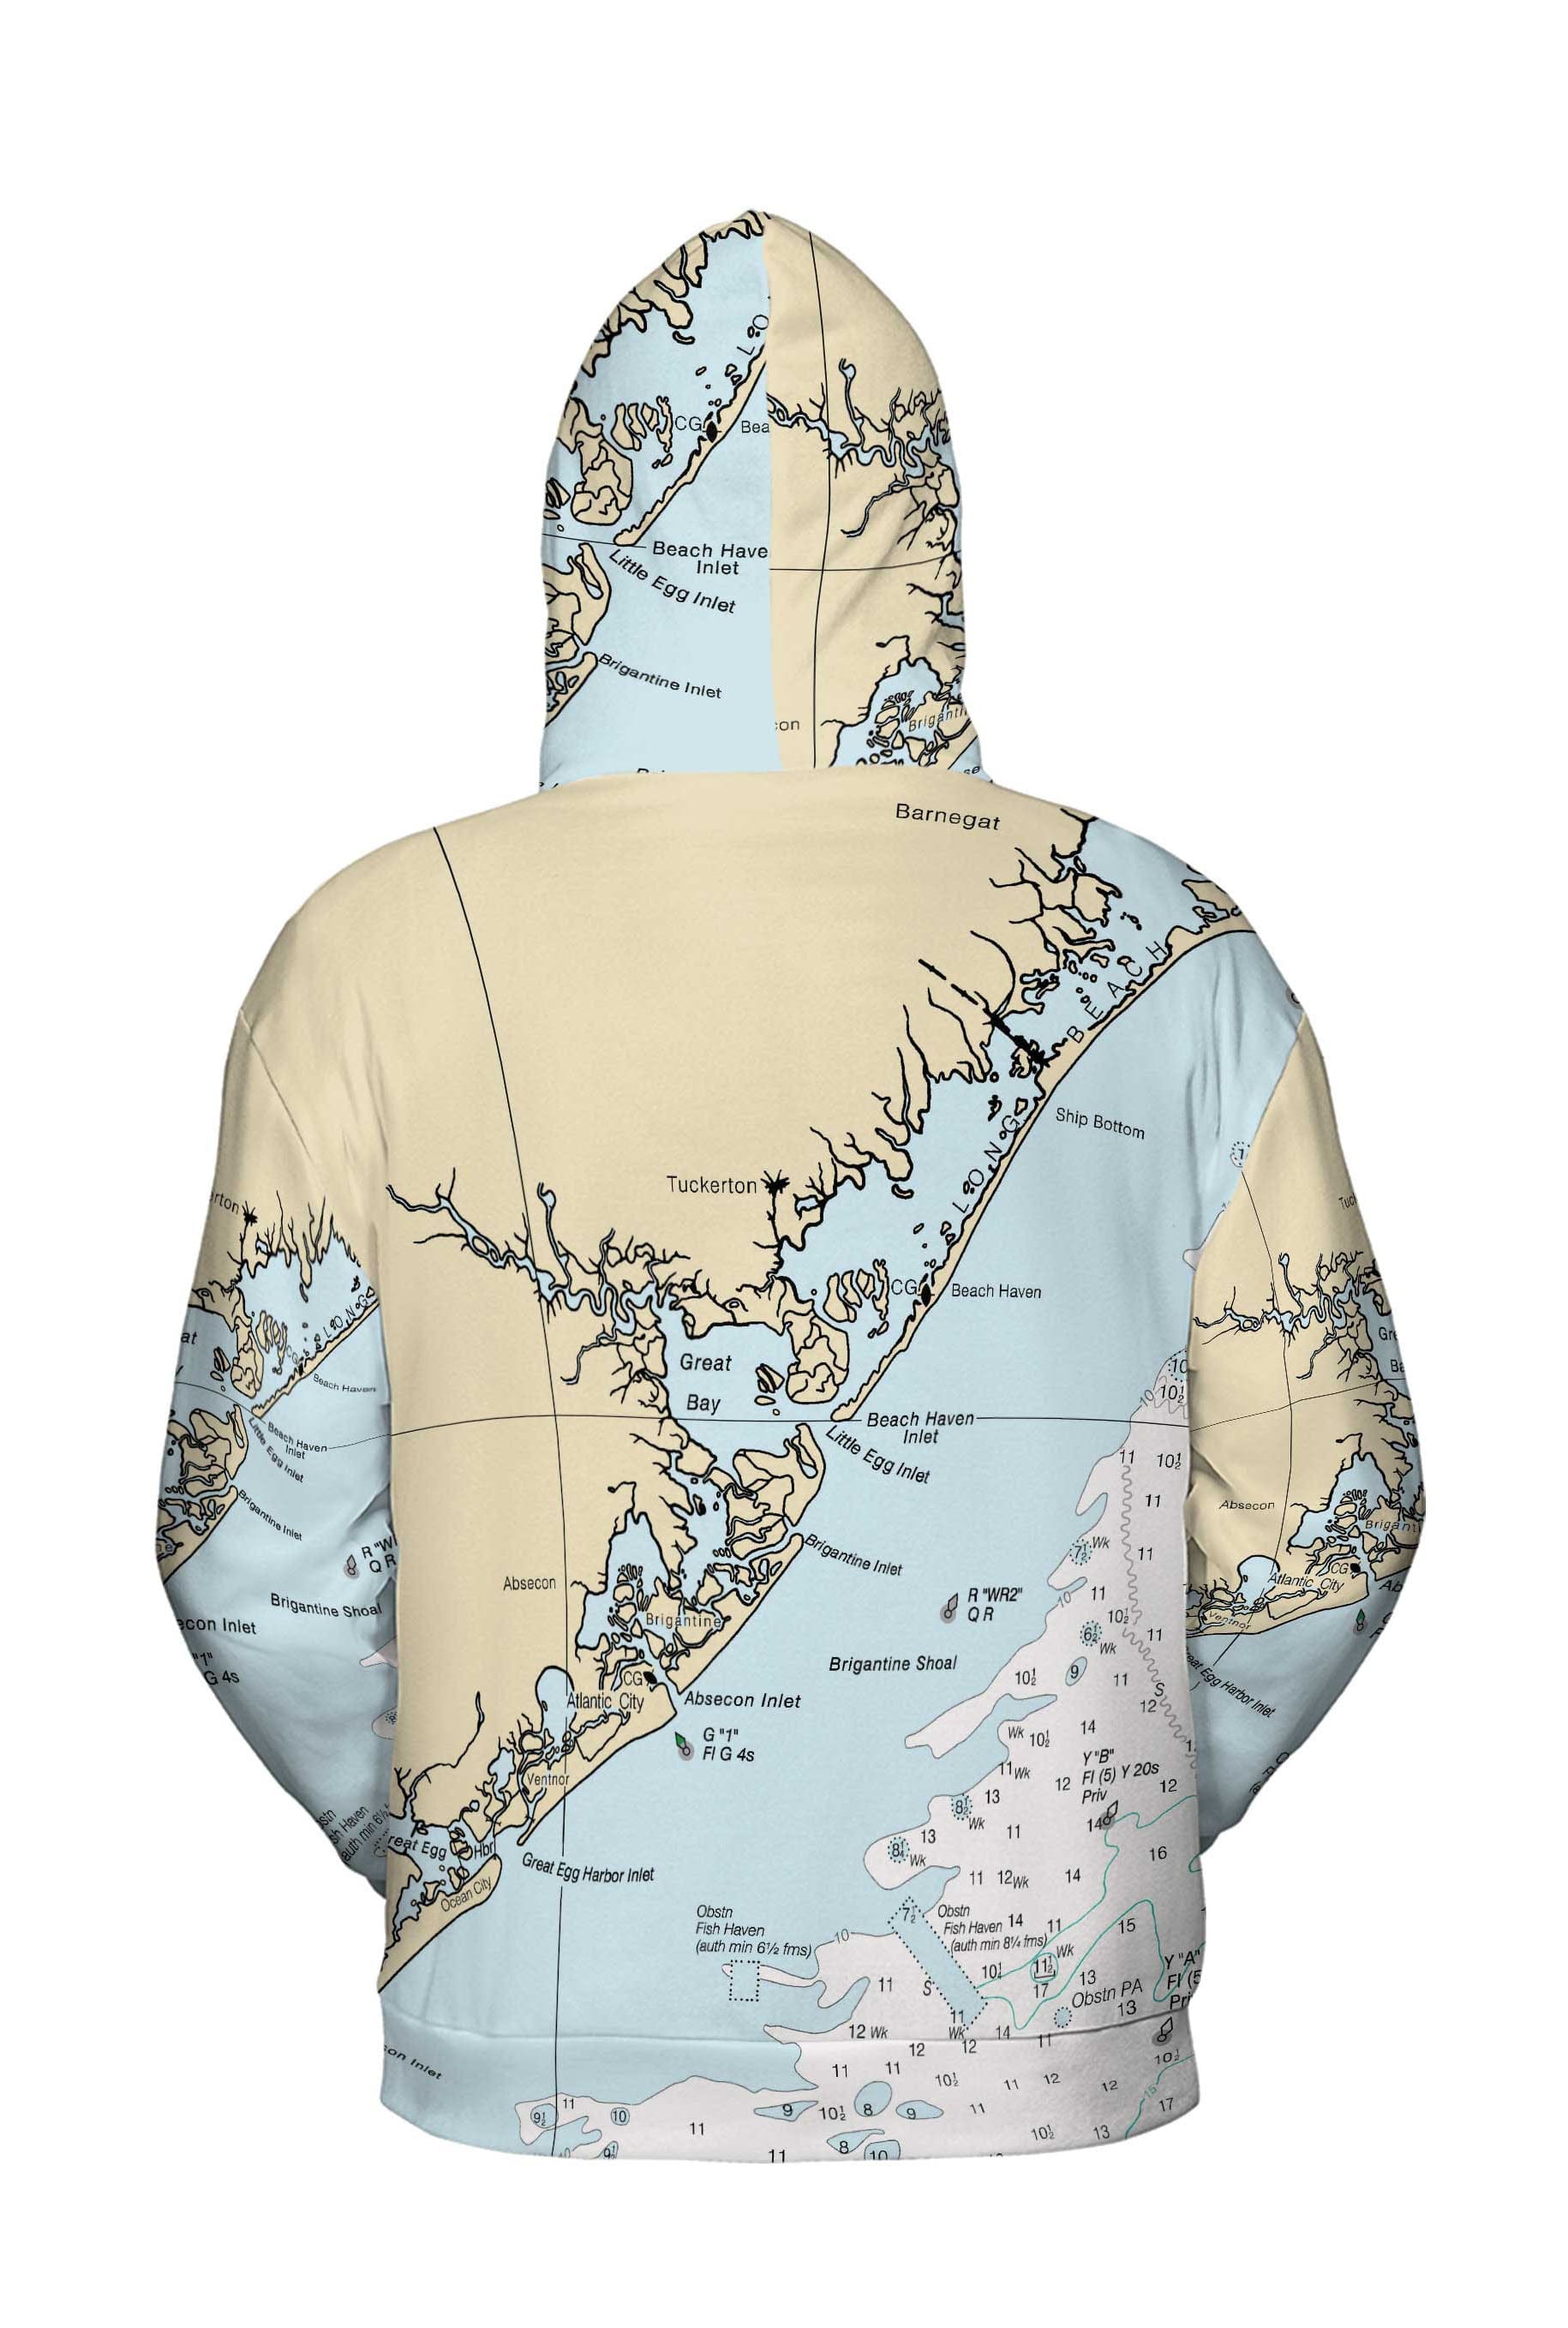 The Great Bay New Jersey Lightweight Hoodie